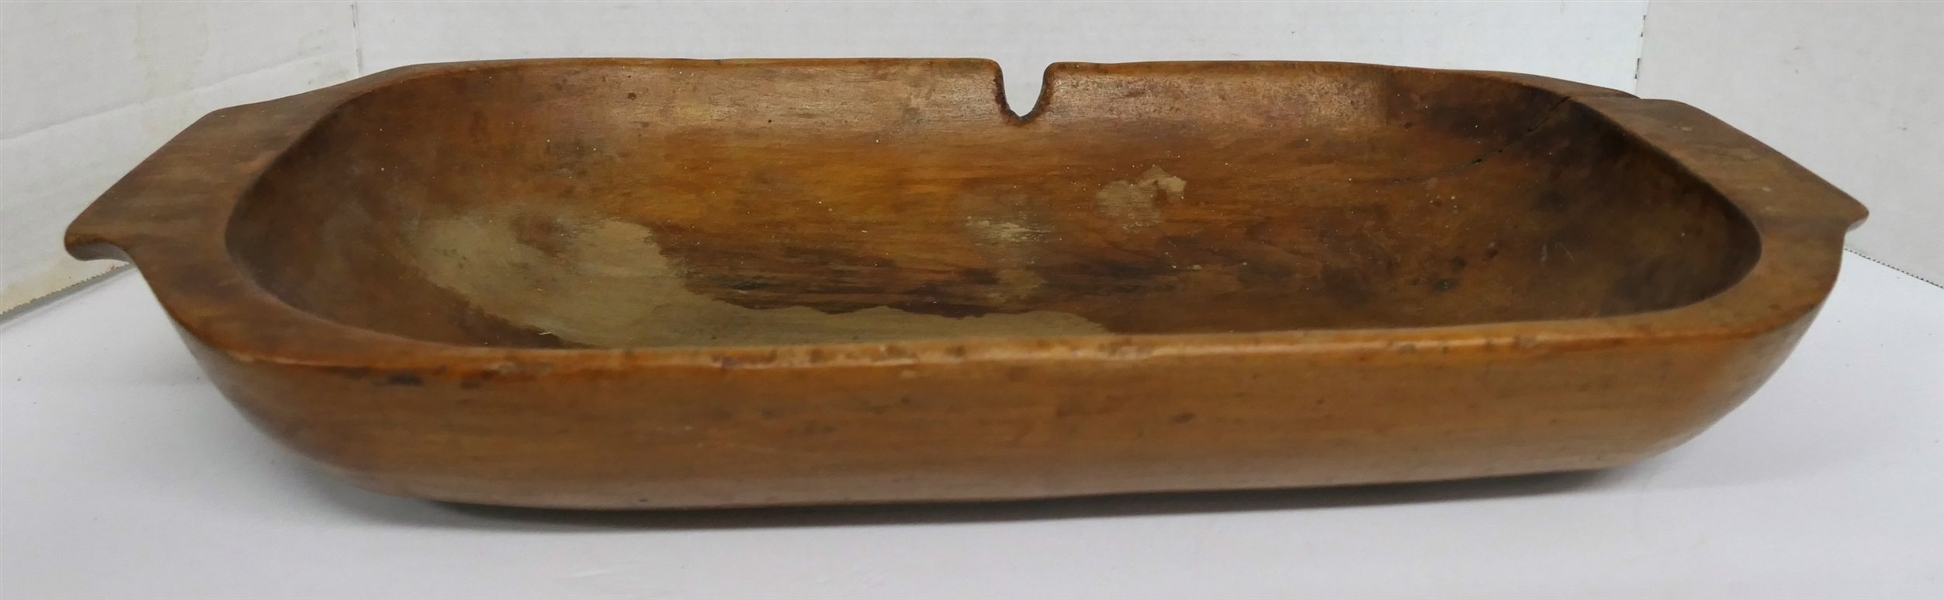 Wood Dough Tray - Measuring 19 1/2" by 10 1/2"